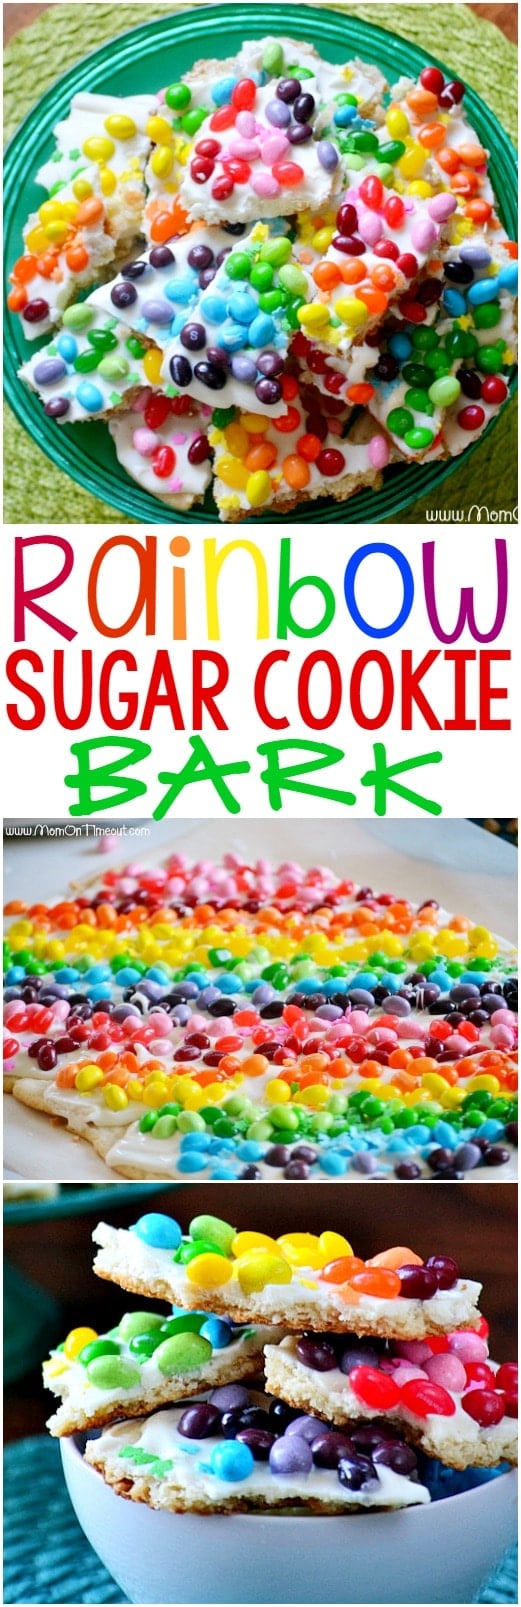 Rainbow Sugar Cookie Bark made with refrigerated sugar cookie dough and candy - get ready to taste the rainbow! This easy dessert is always a hit with kids and is perfect for St. Patrick's Day and other parties!